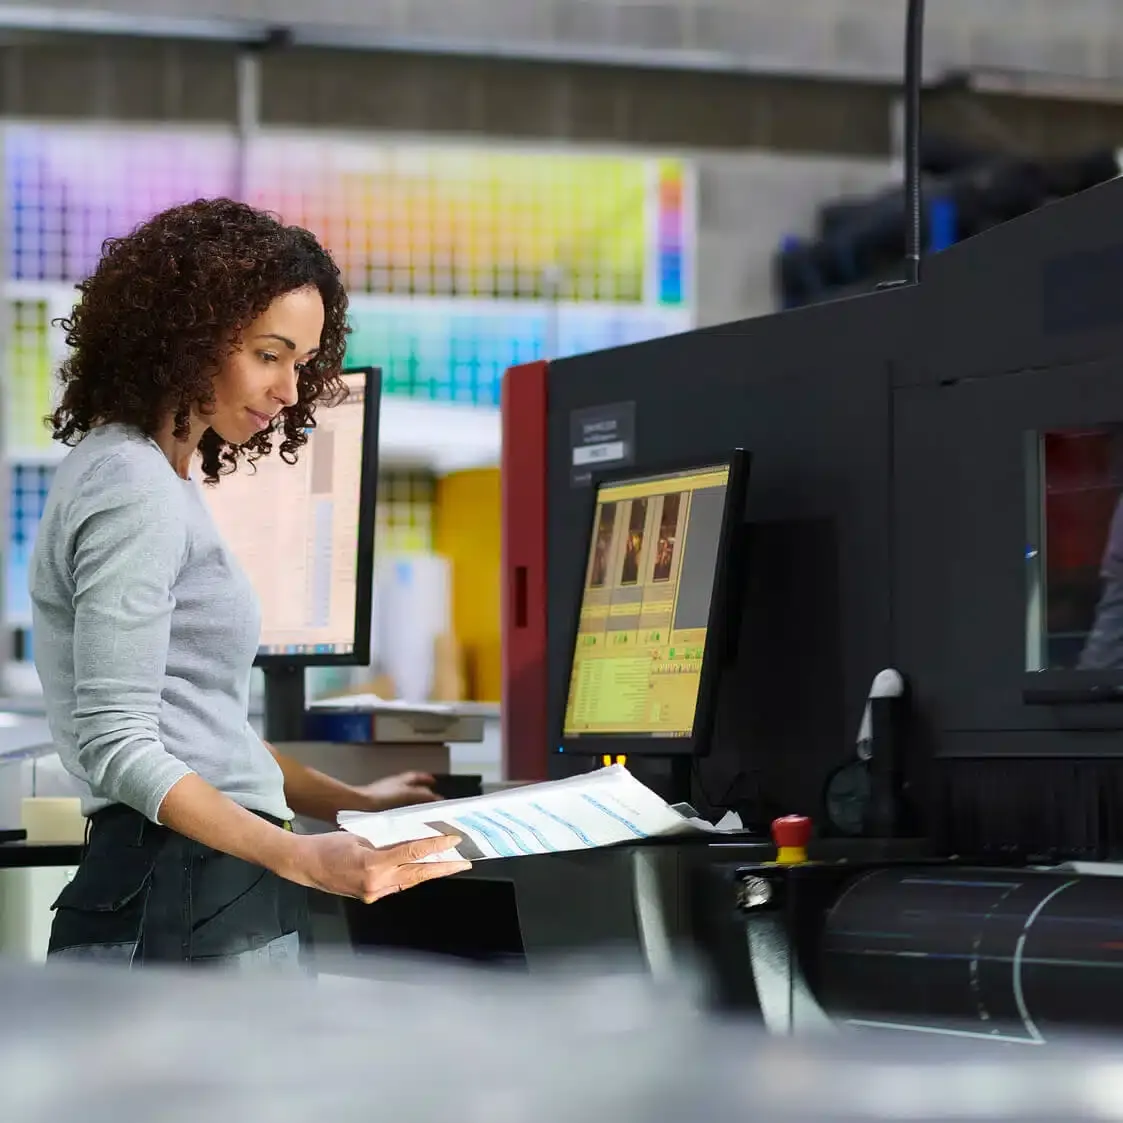 zensmart is showing A person with curly hair wearing a gray shirt stands in front of a large printer in a print shop, holding a paper and looking at a computer screen. Colorful photo prints are displayed on the wall behind them. with print workflow automation